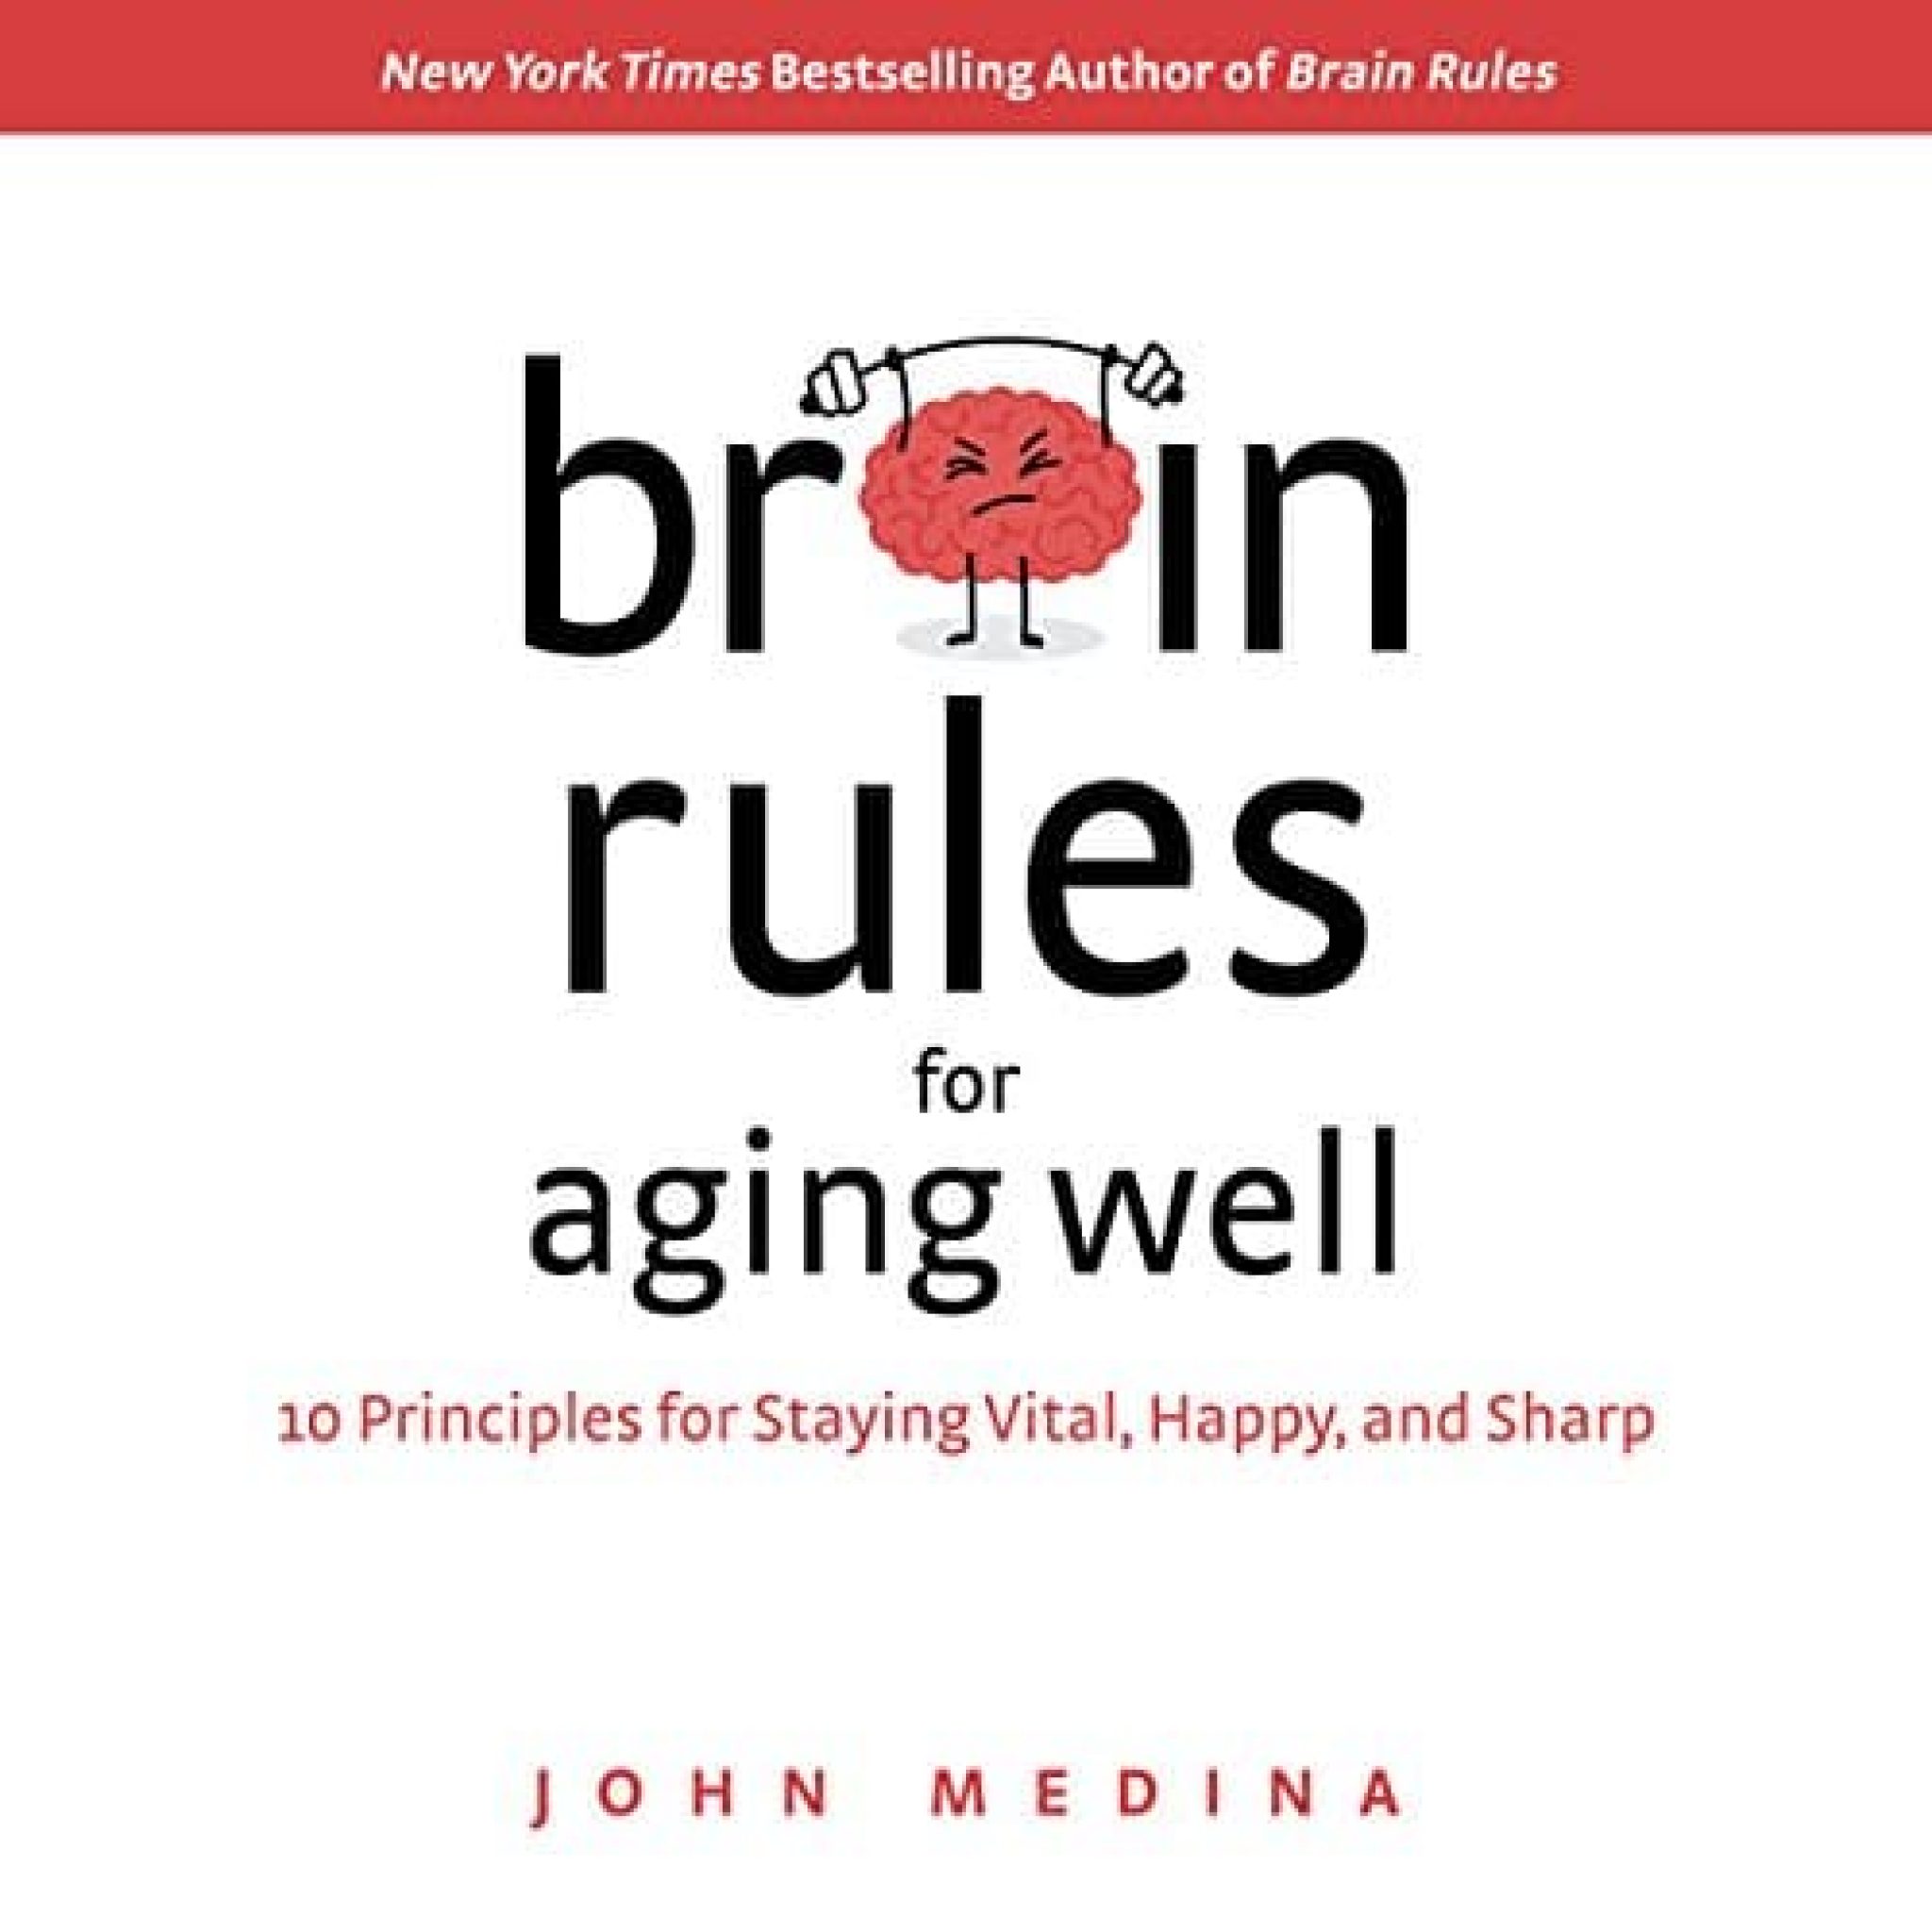 brain rules for aging well pdf free download